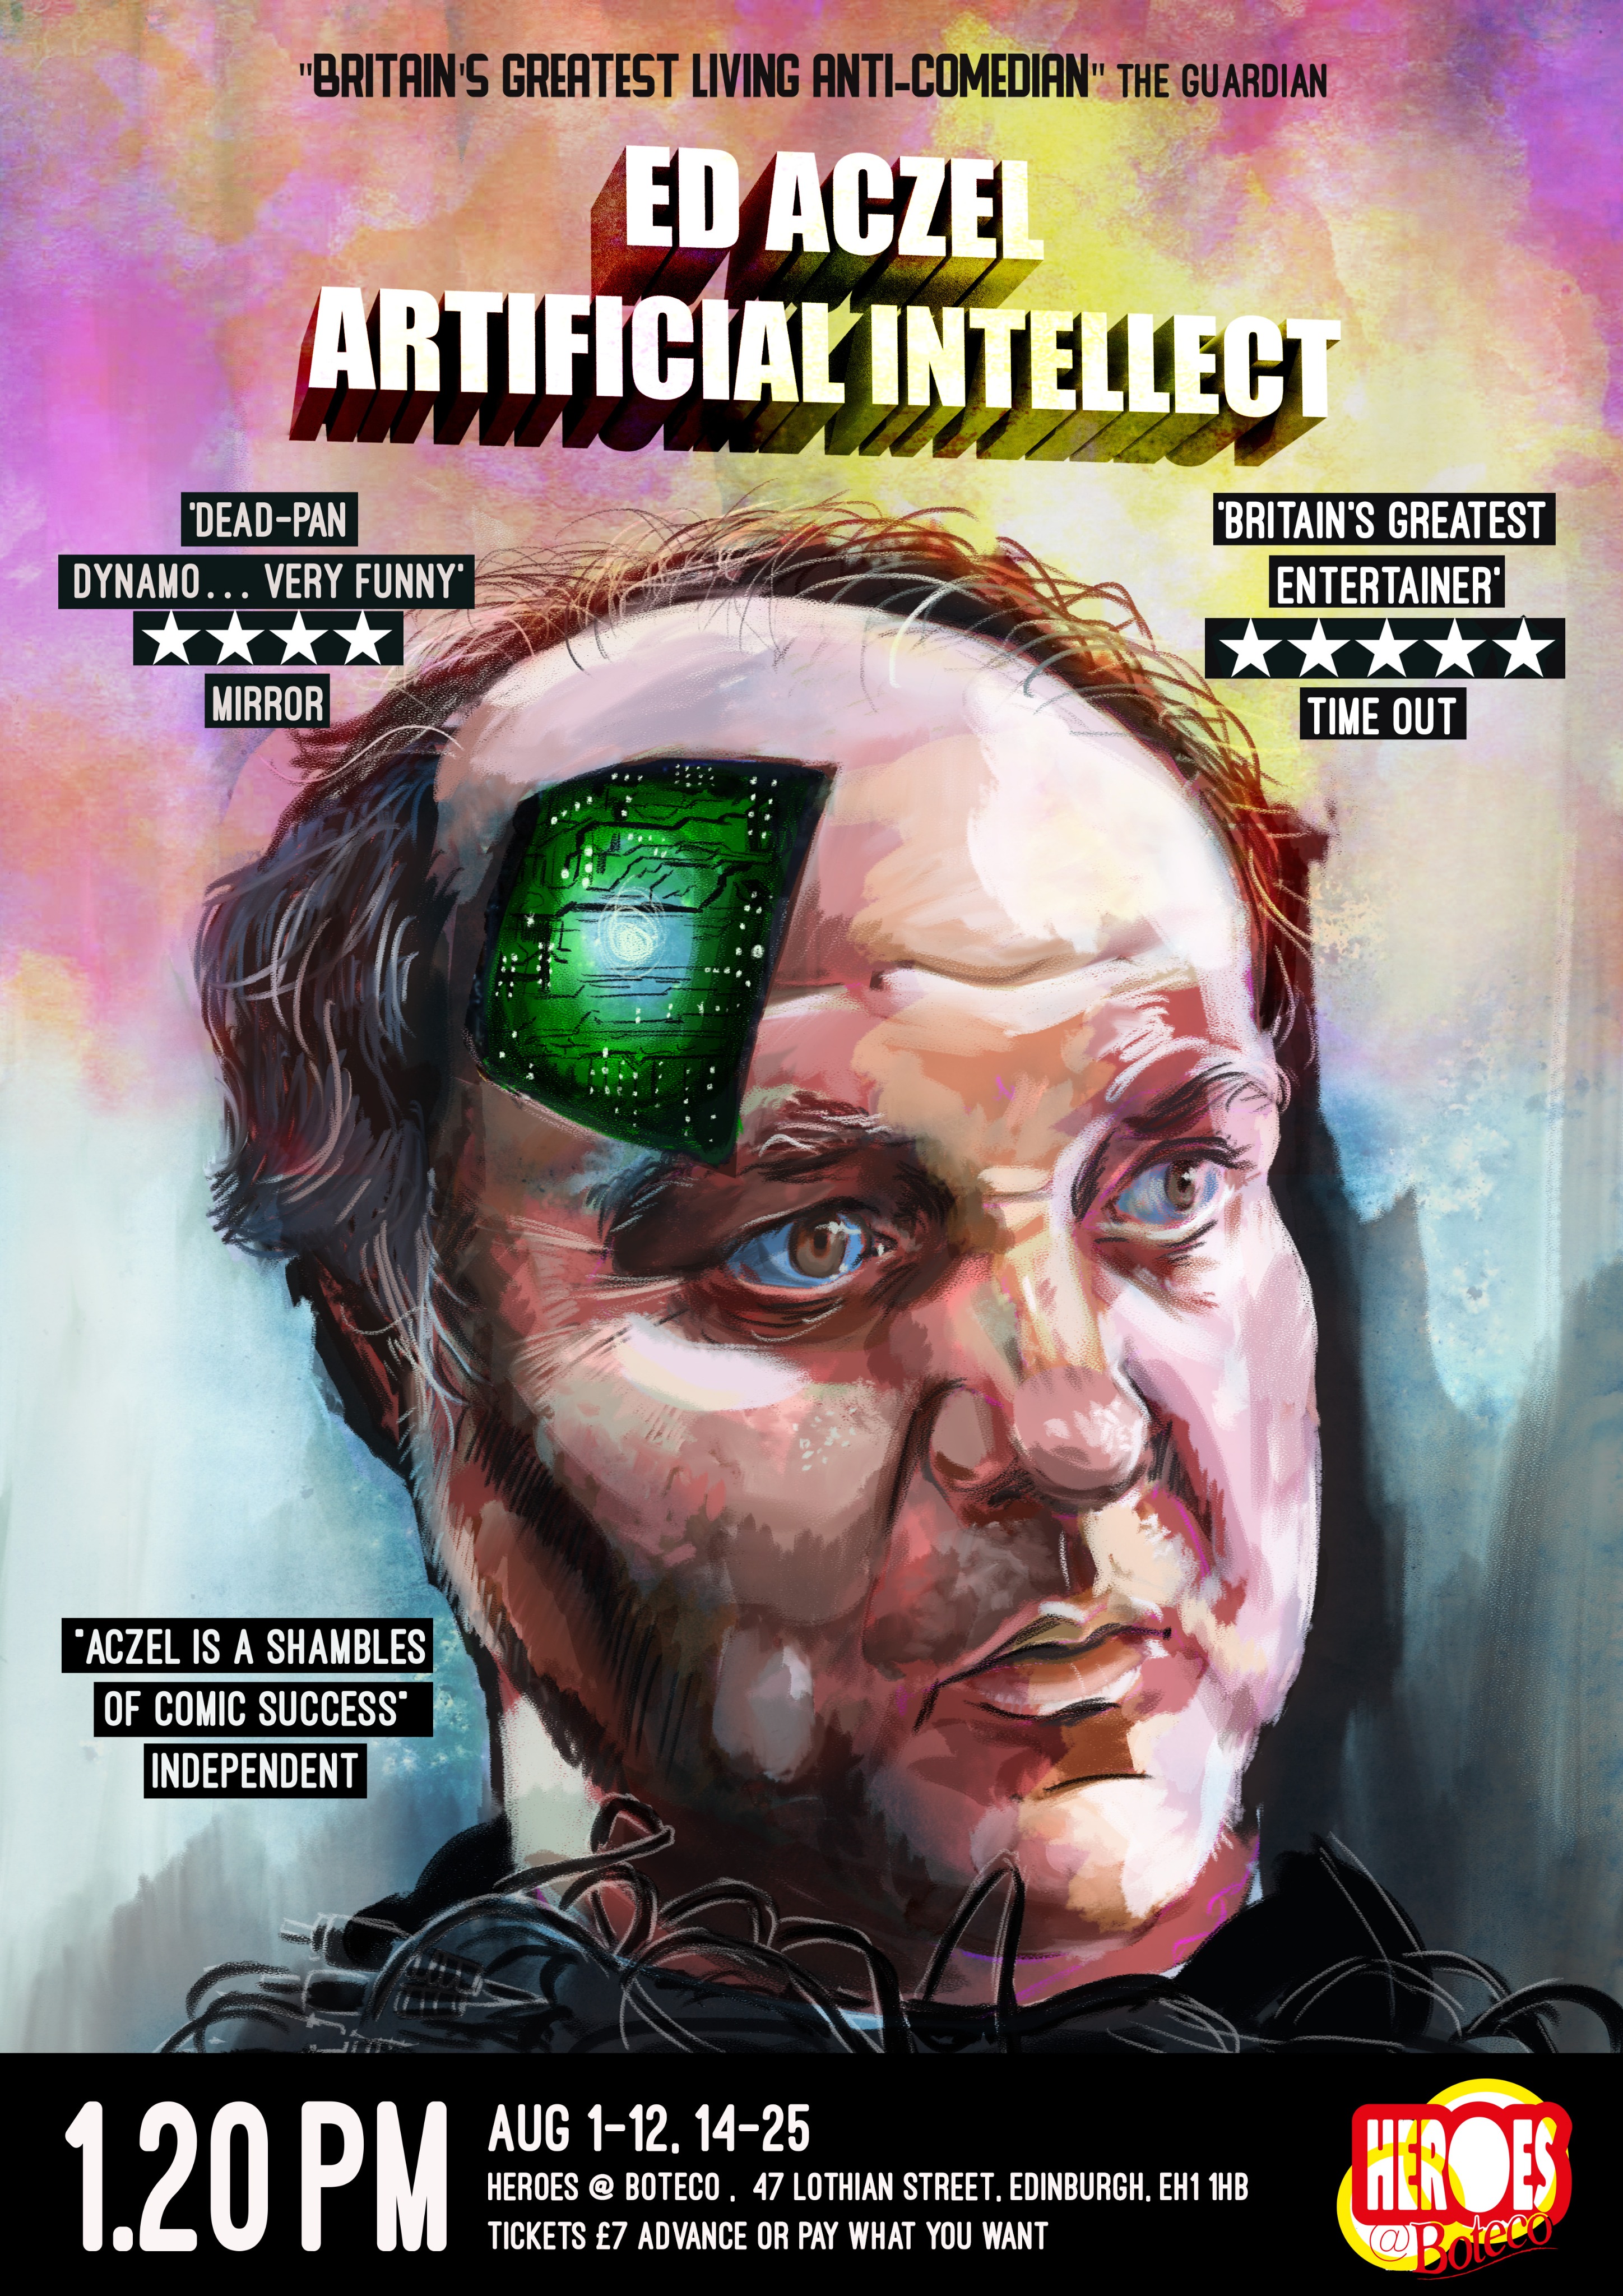 The poster for Edward Aczel - Artificial Intellect